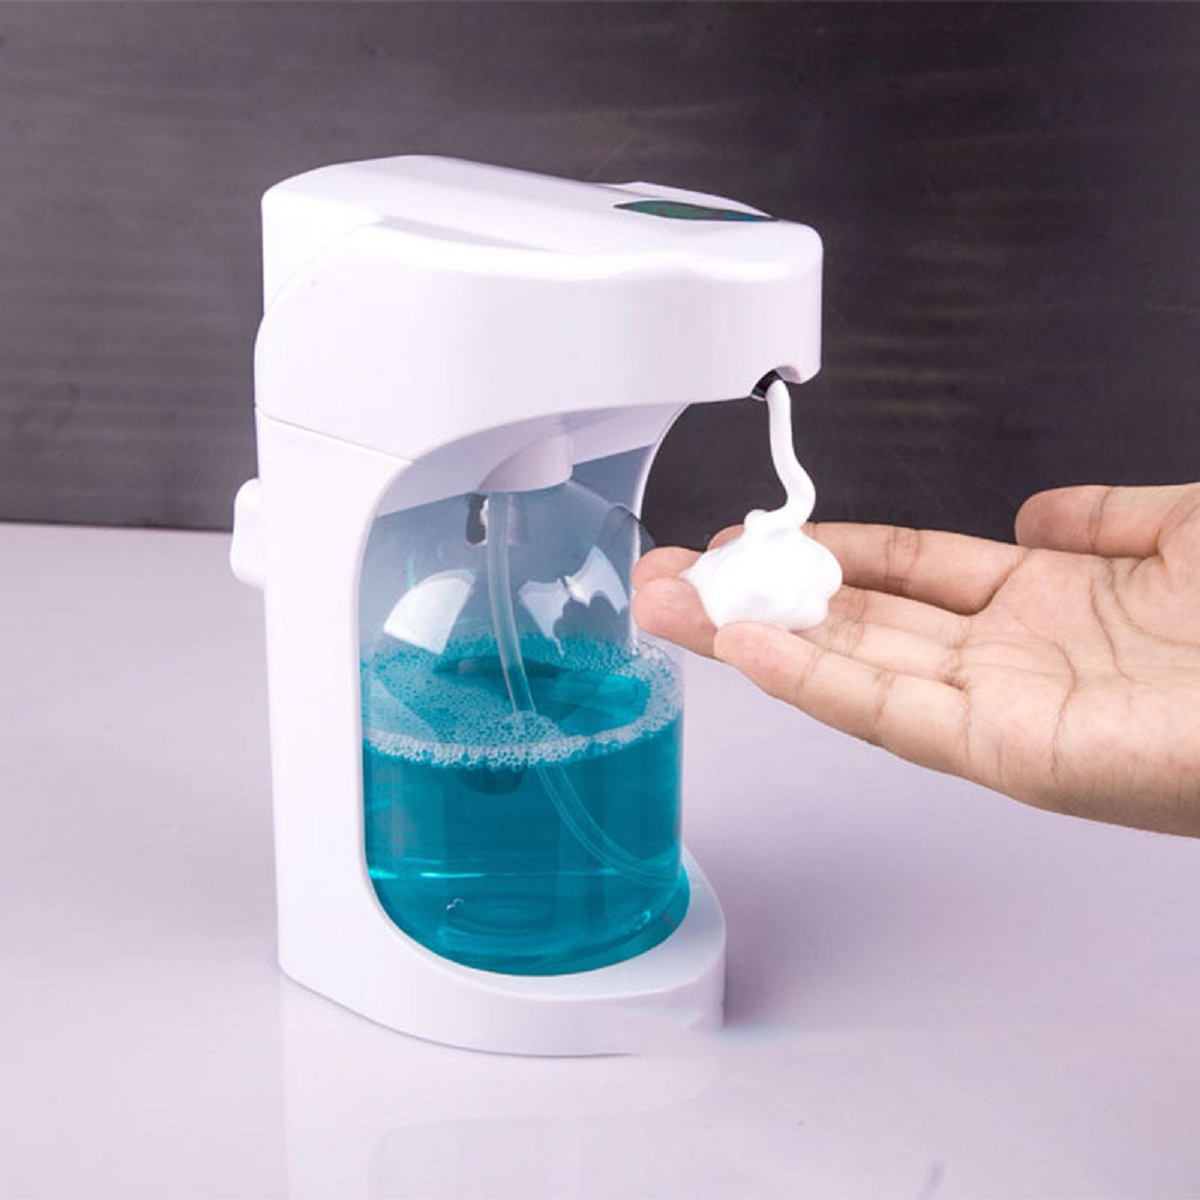 Automatic-Foam-Hand-Washing-Machine-Induction-Soap-Dispenser-Liquid-Bottle-Stand-Wall-Hanging-Intell-1585566-6